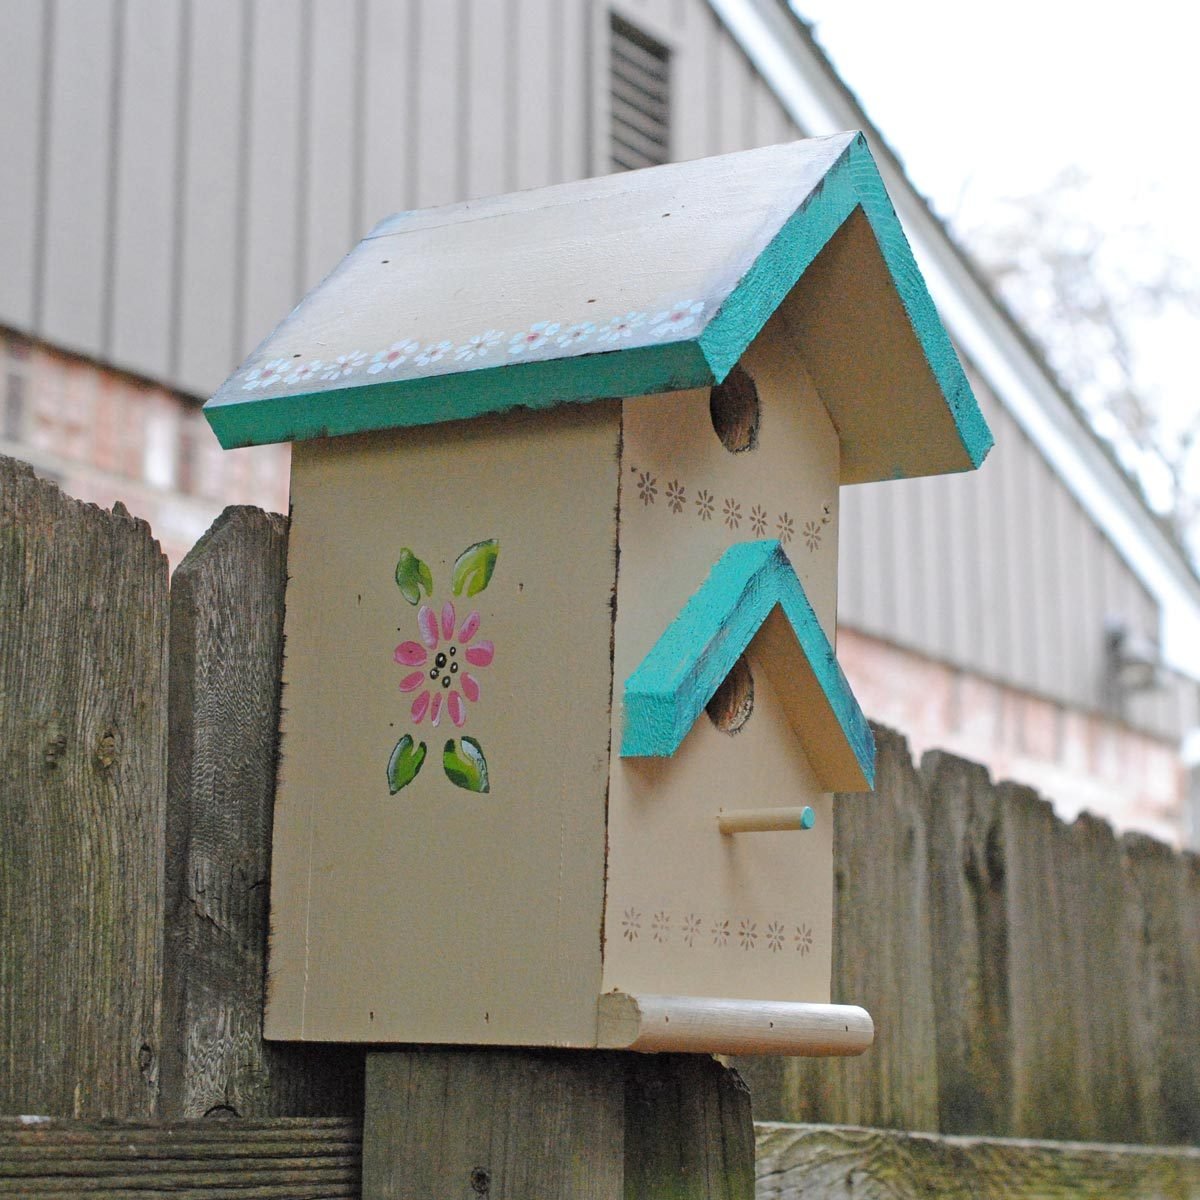 Tole Painting a Birdhouse Brings Garden Charm